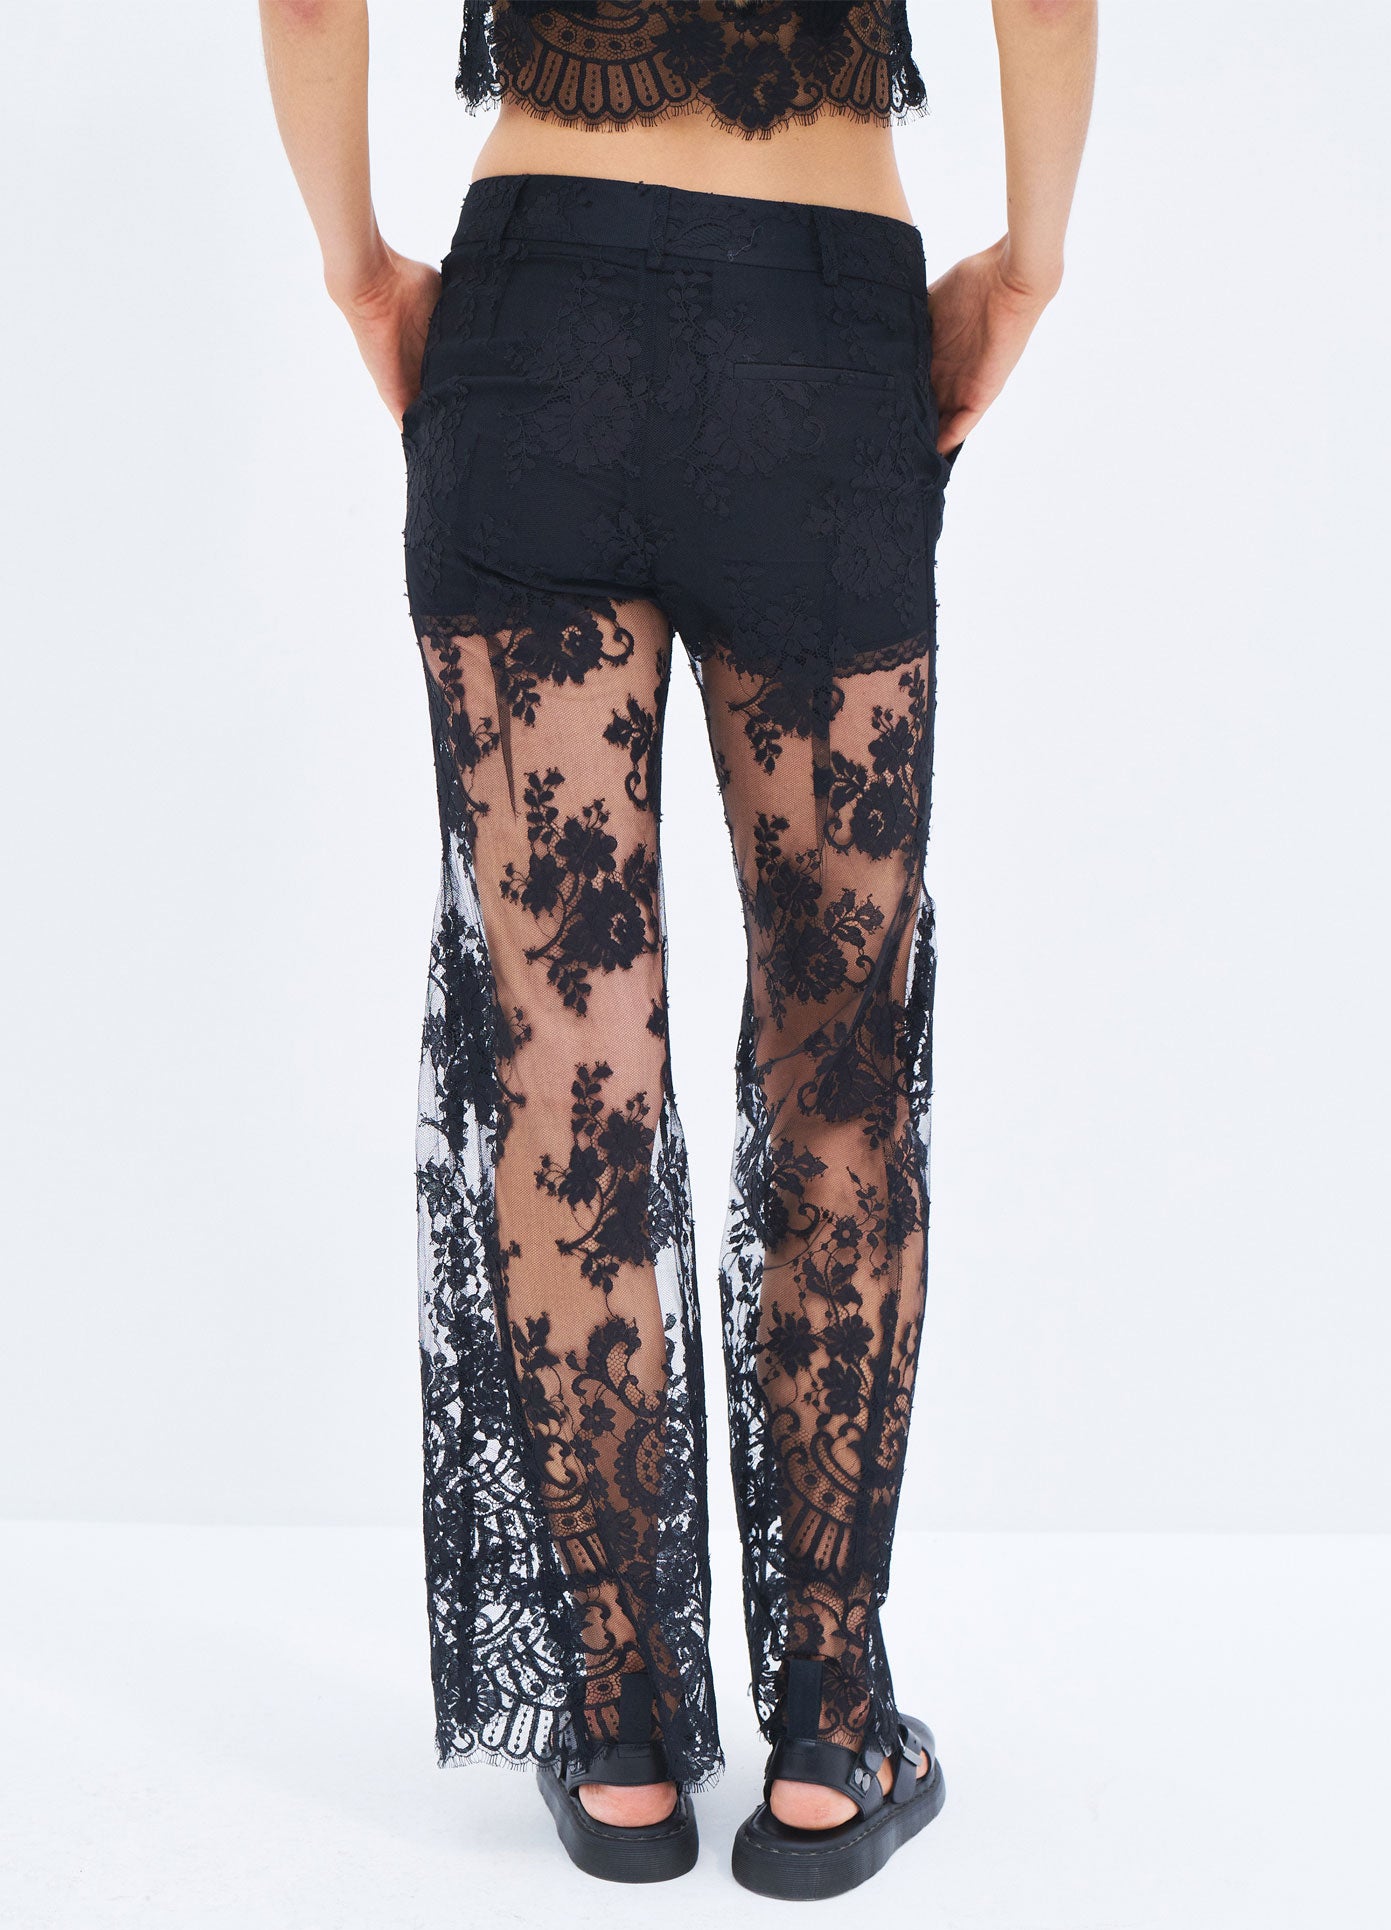 MONSE Spring 2024 Floral Lace Pant in Black on model back bottoms view